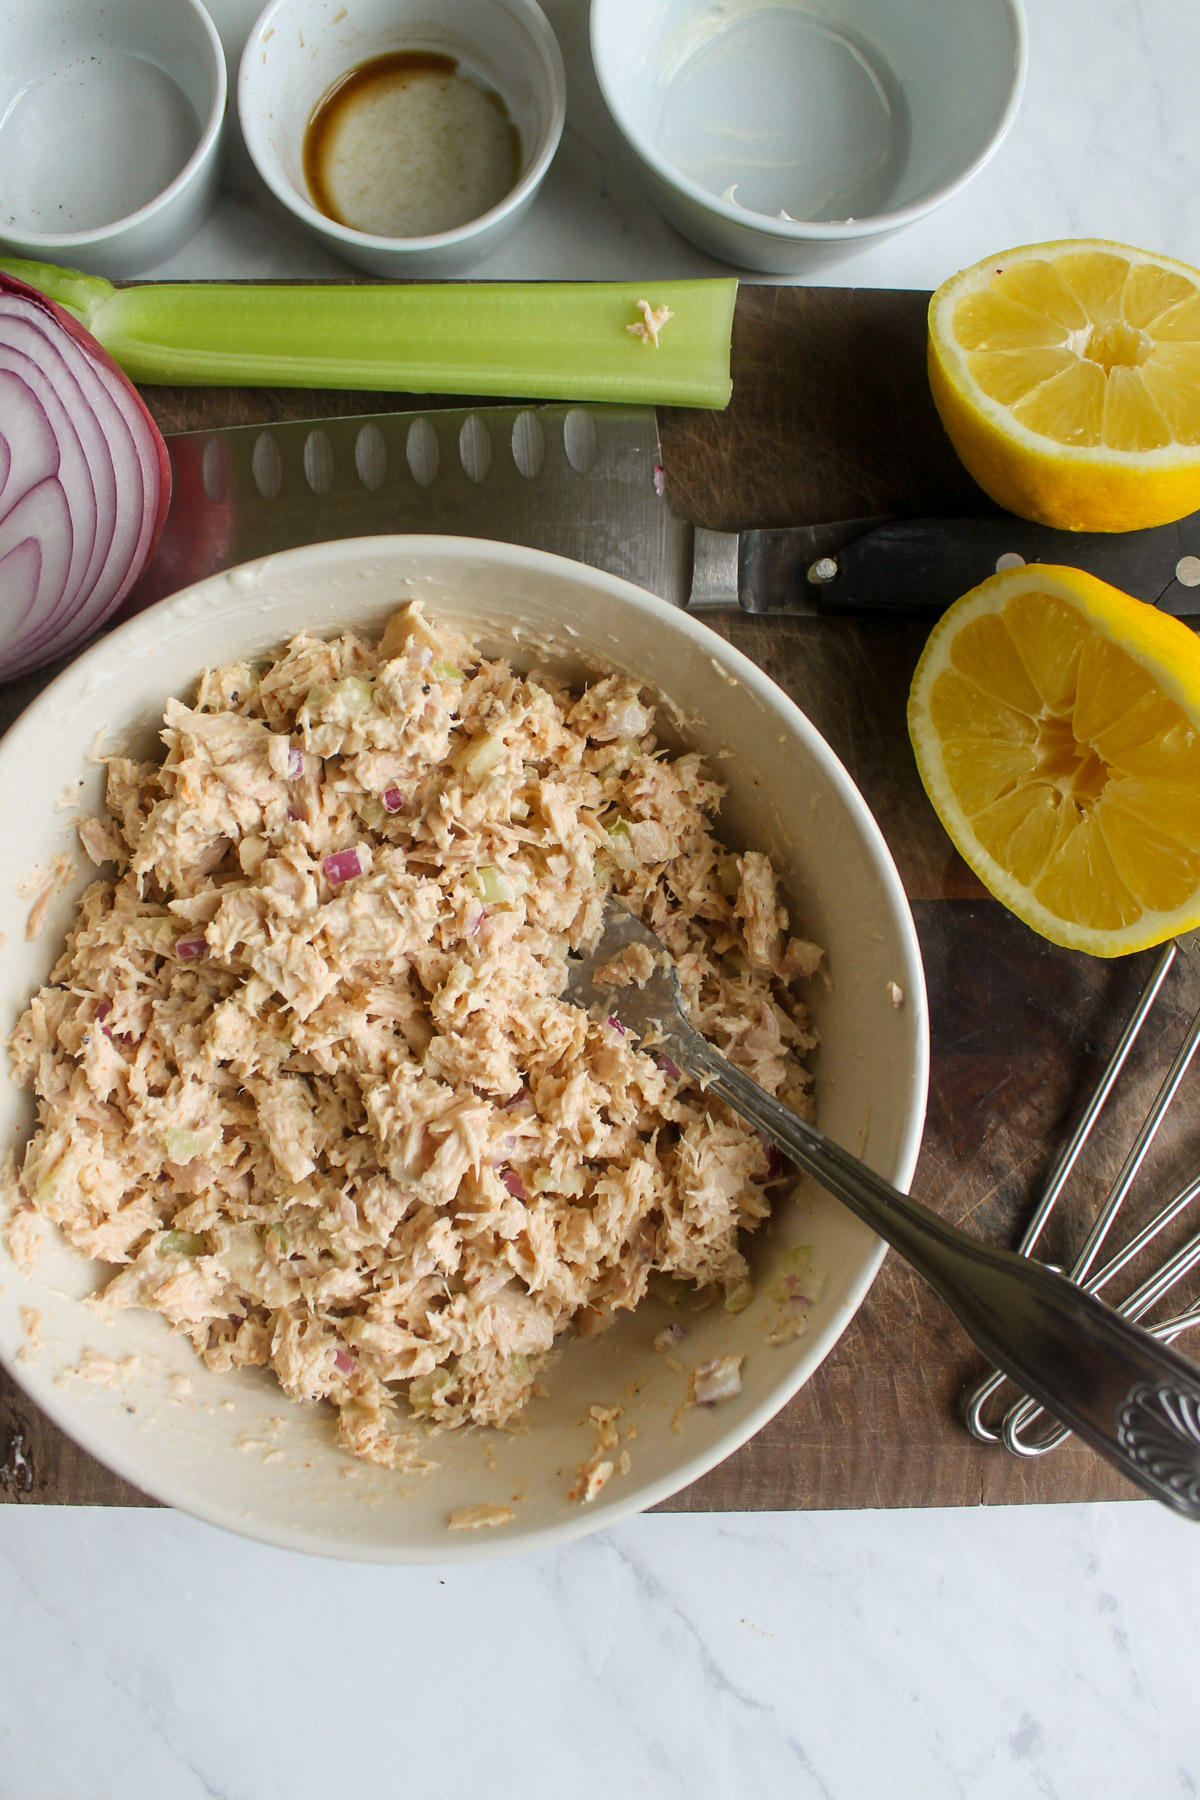 Mixed tuna salad in a bowl on a cutting board with a lemon.